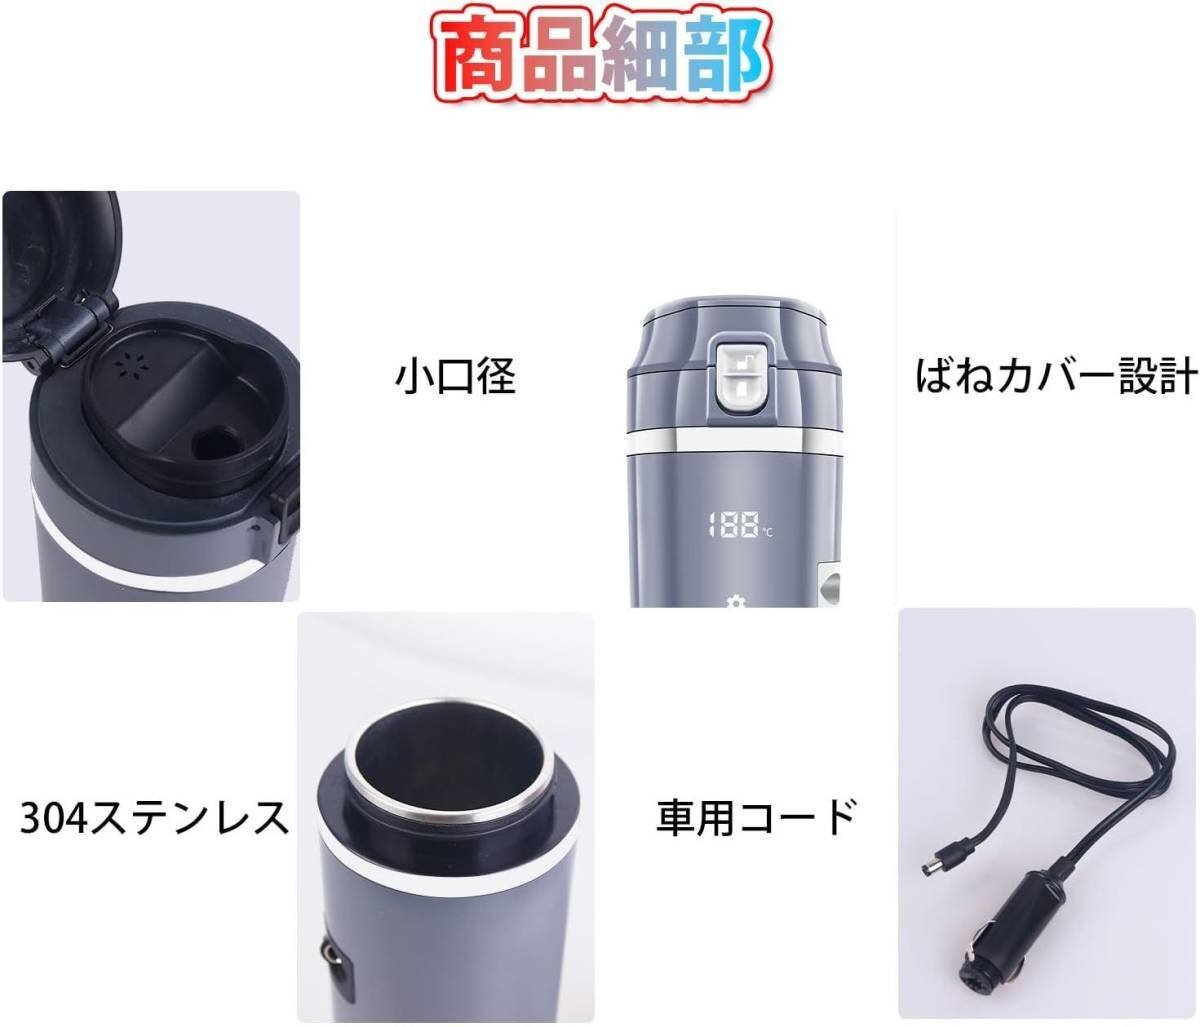  in-vehicle electric kettle DC12V/24V 500ml high capacity automobile truck ... temperature tea flour milk hot water .. vessel hot water dispenser sleeping area in the vehicle 304 stainless steel steel vacuum insulation 